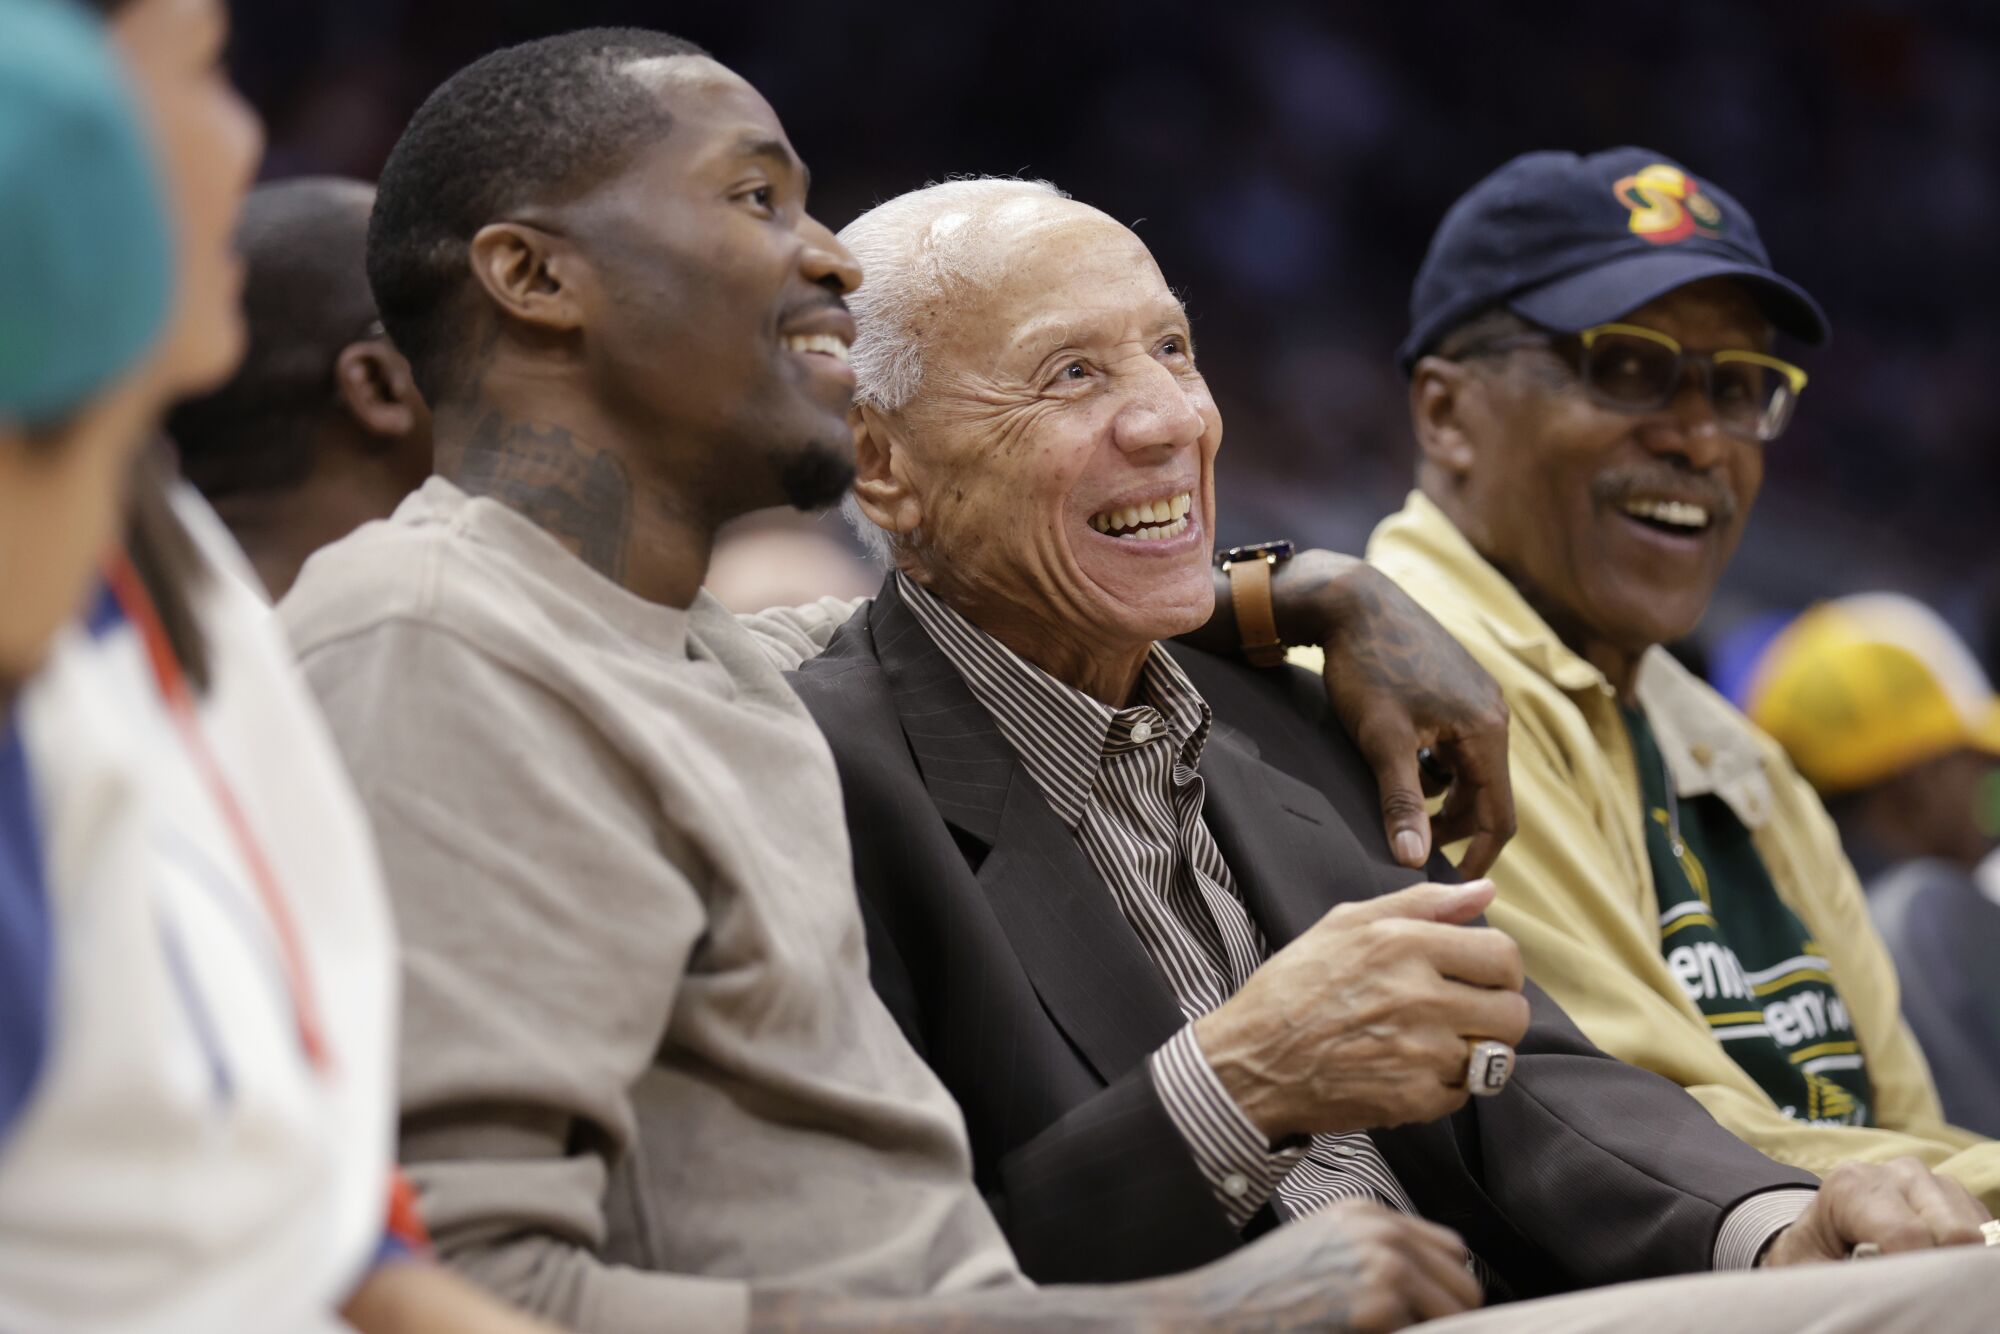 Former NBA player Jamal Crawford, left, with his arm around former player and coach Lenny Wilkens.